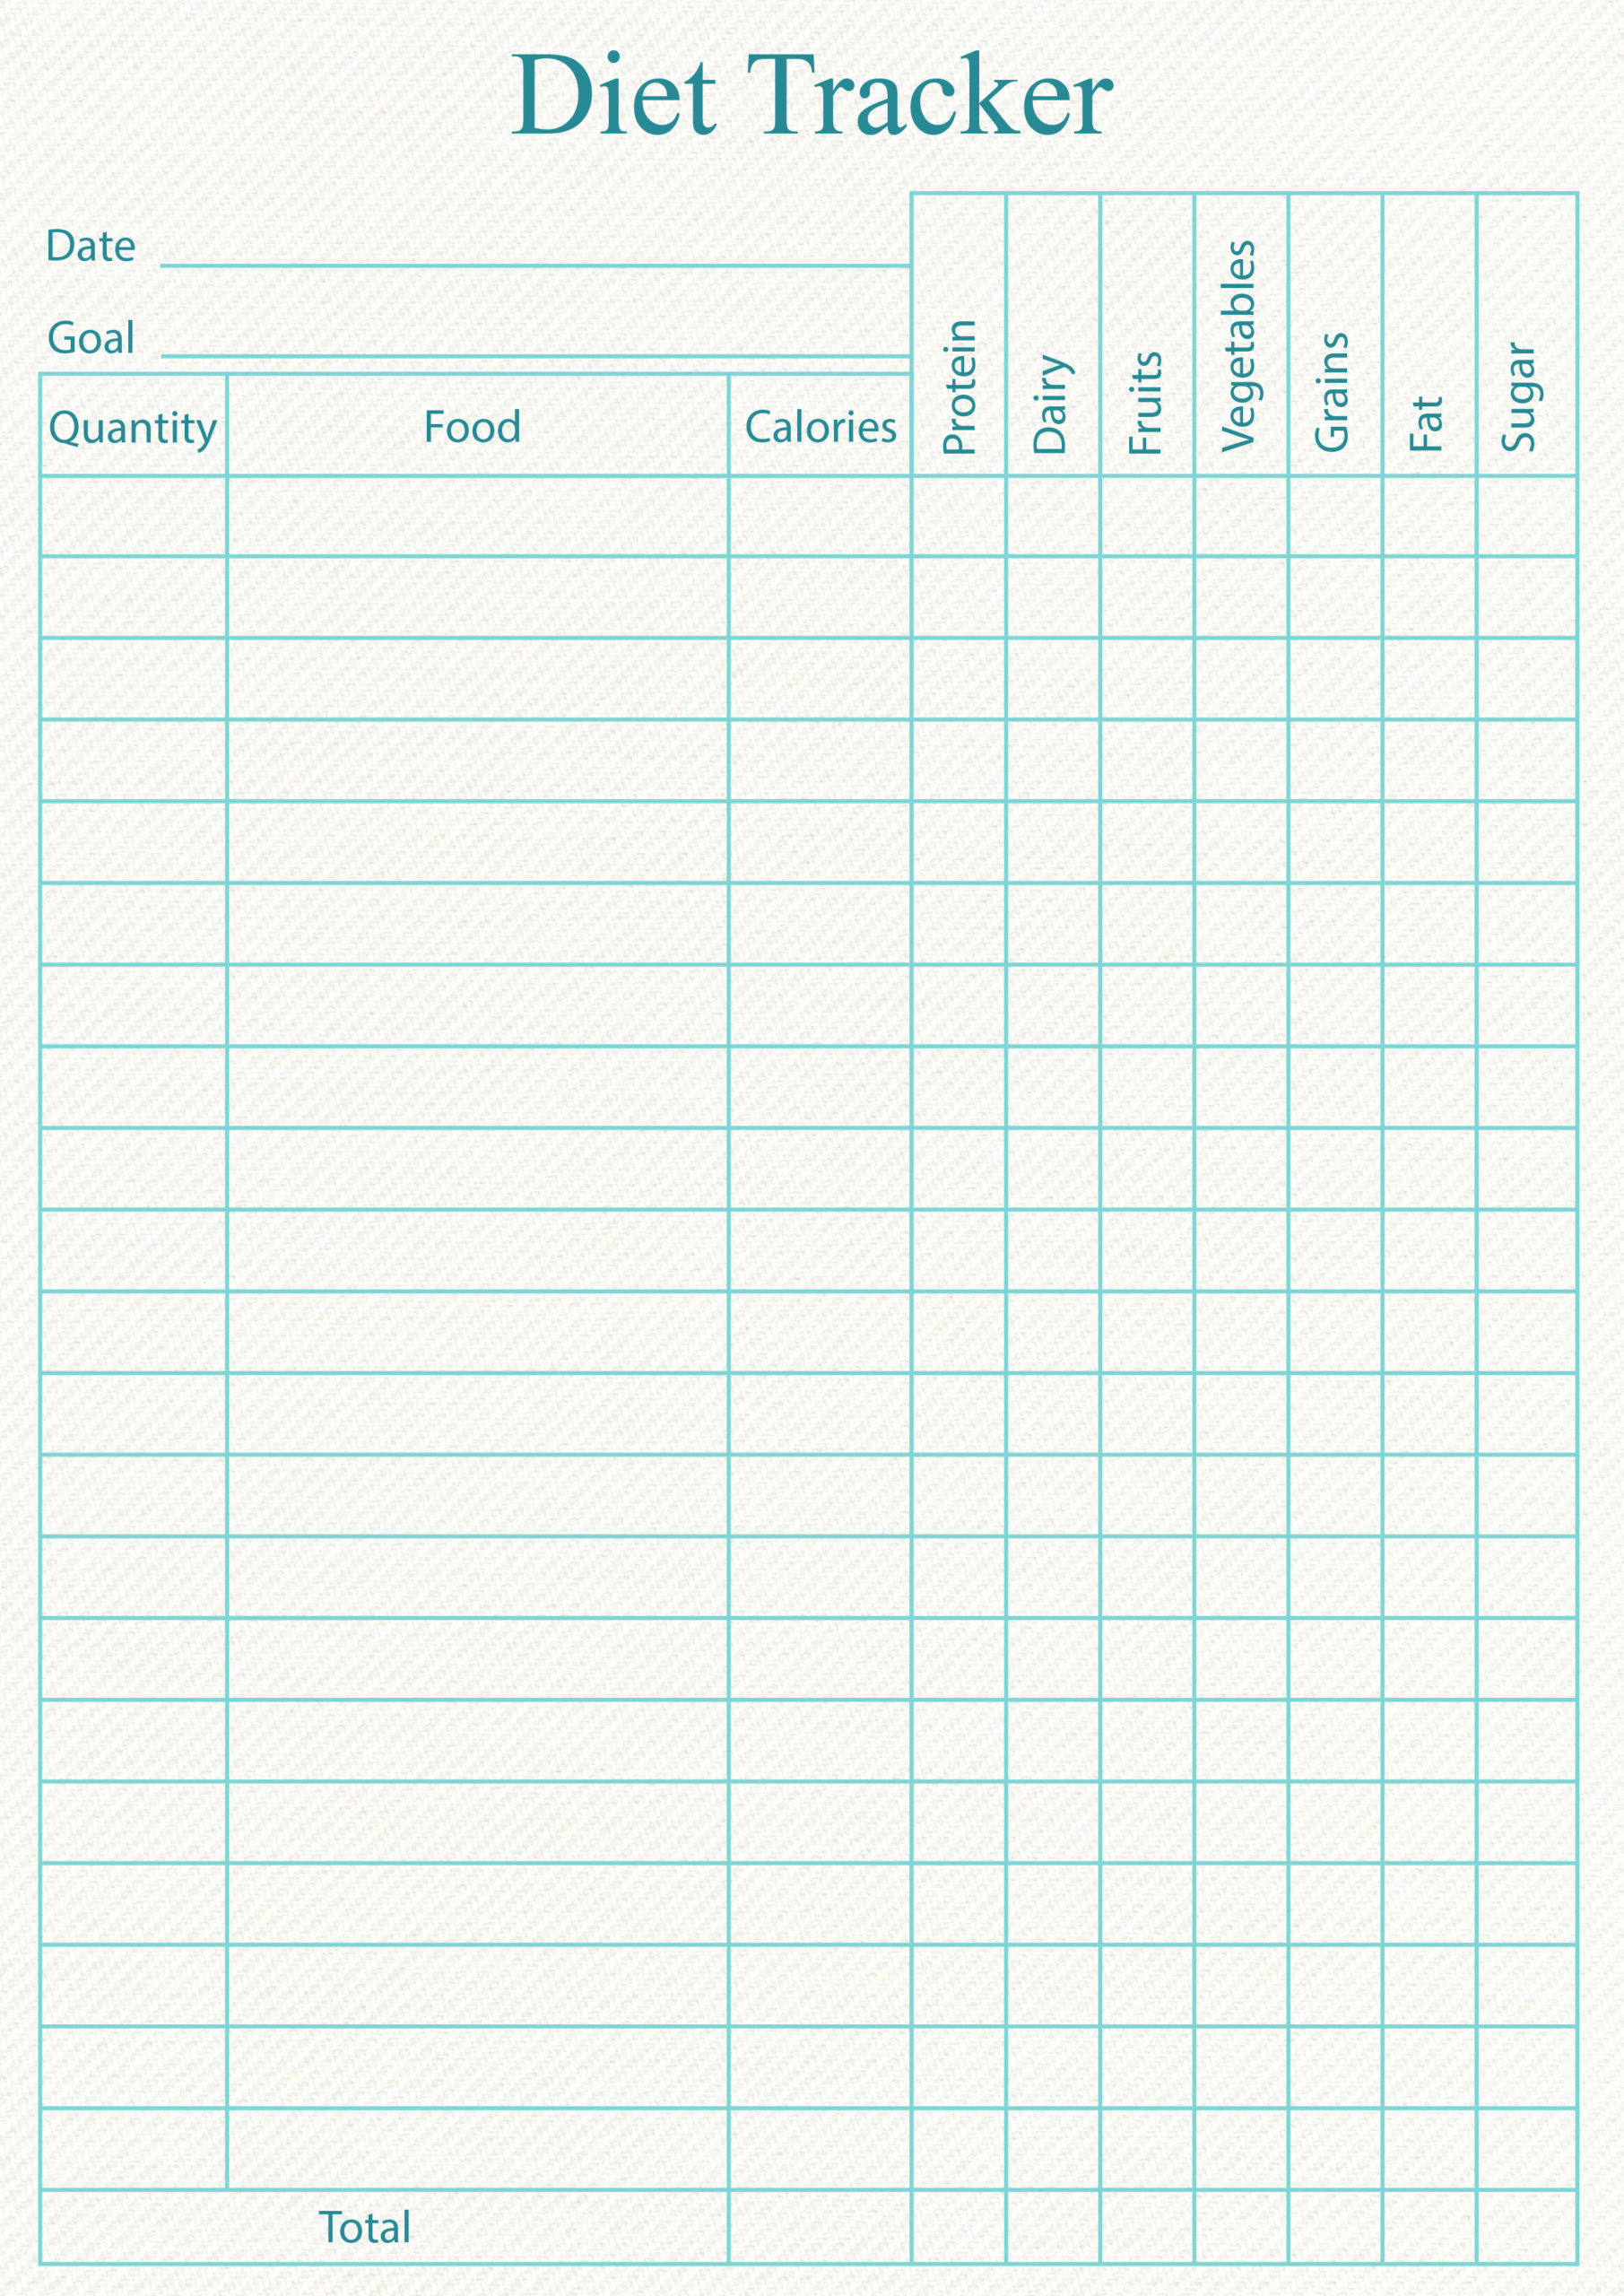 Diet Tracker Colour Date Goal Notes Size Food Calories Protein 